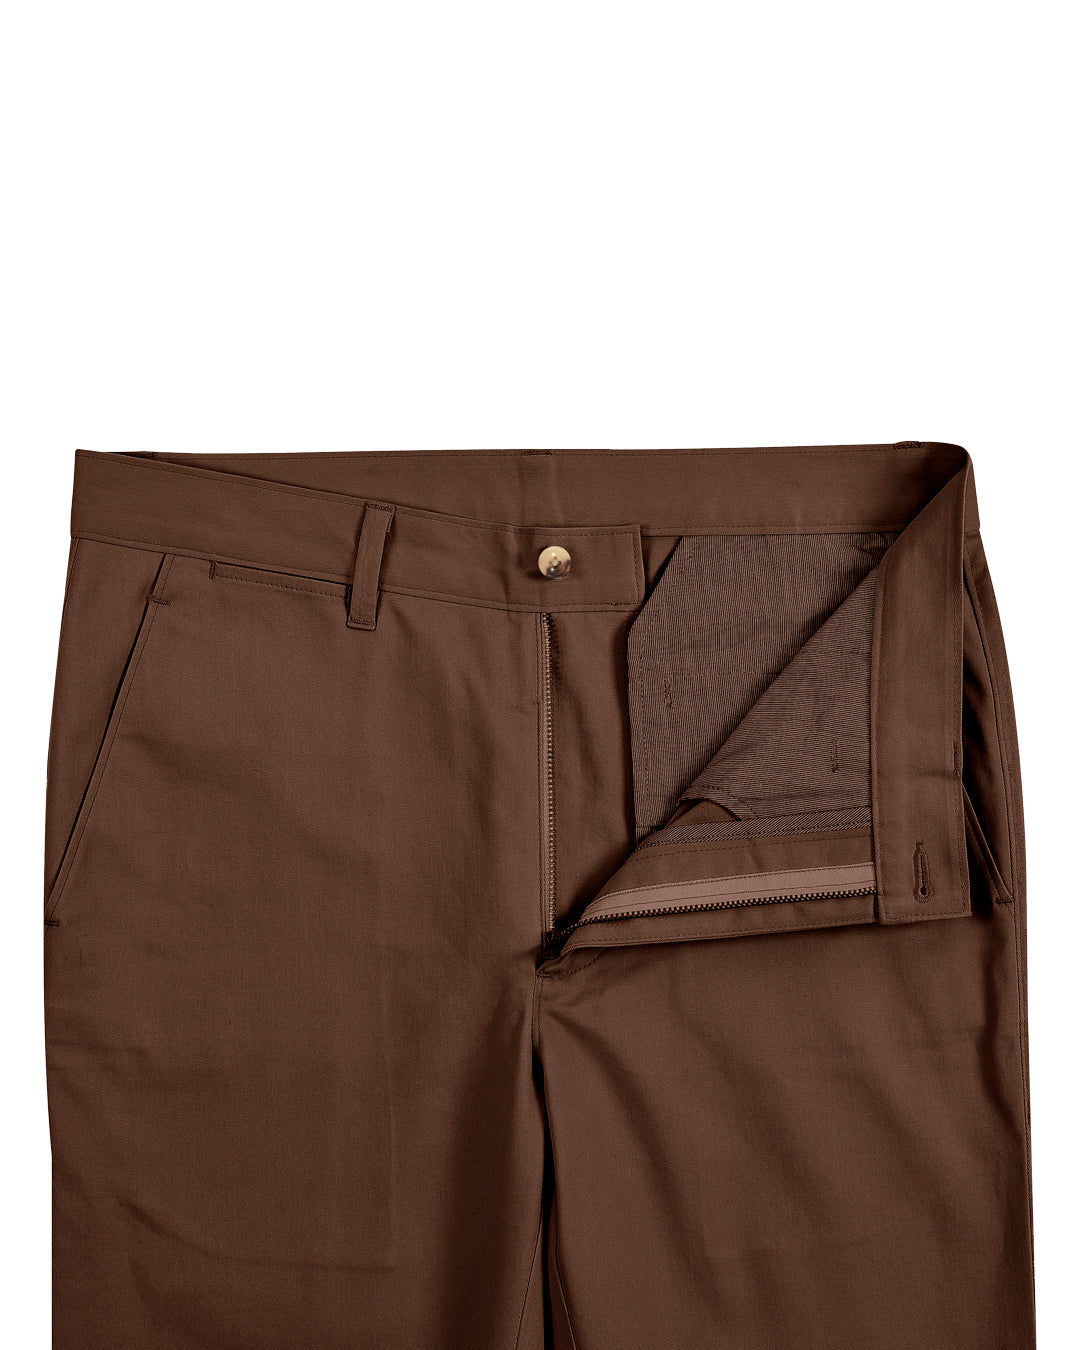 Front open view of custom Genoa Chino pants for men by Luxire in chestnut brown